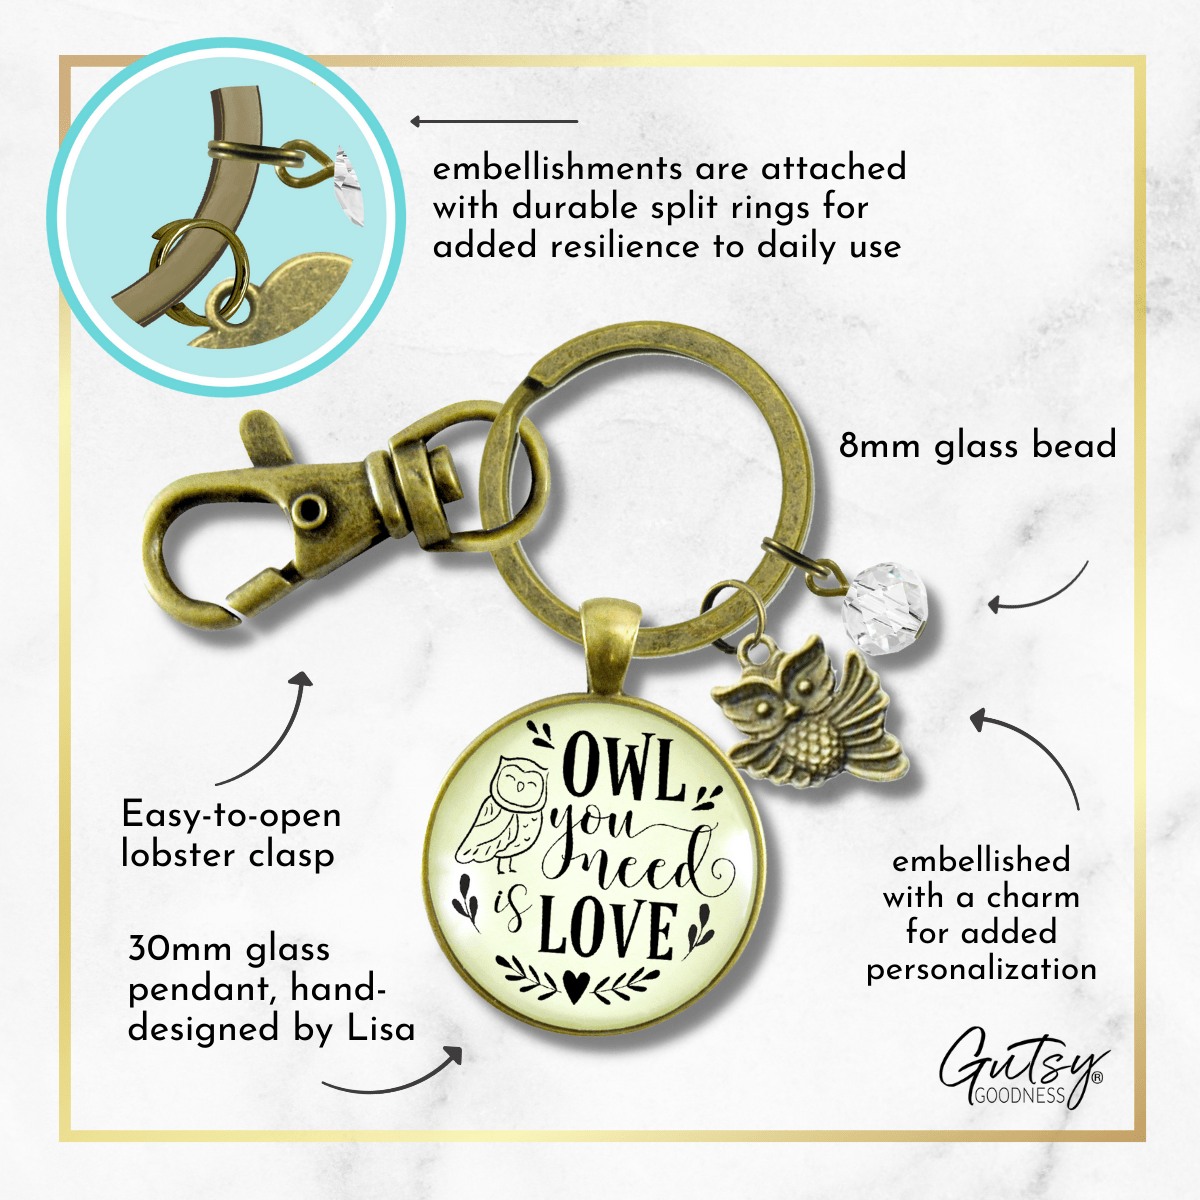 Owl Keychain Owl You Need Is Love Friendship Quote Symbolic Jewelry Inspired Pendant - Gutsy Goodness